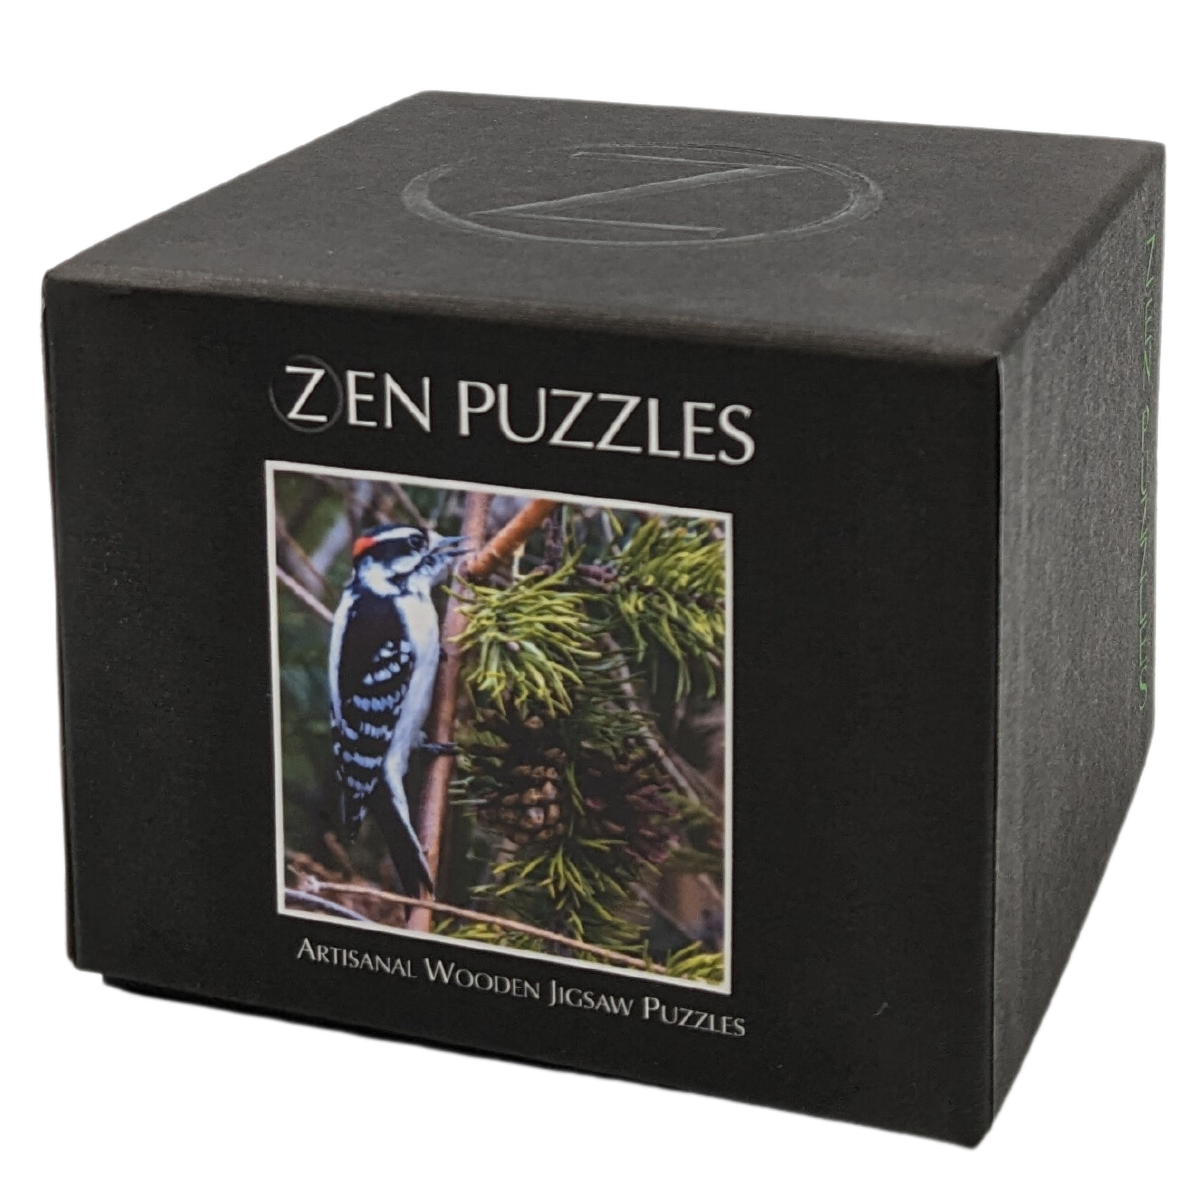 Zen Puzzles- Downy Woodpecker Puzzle Product Box